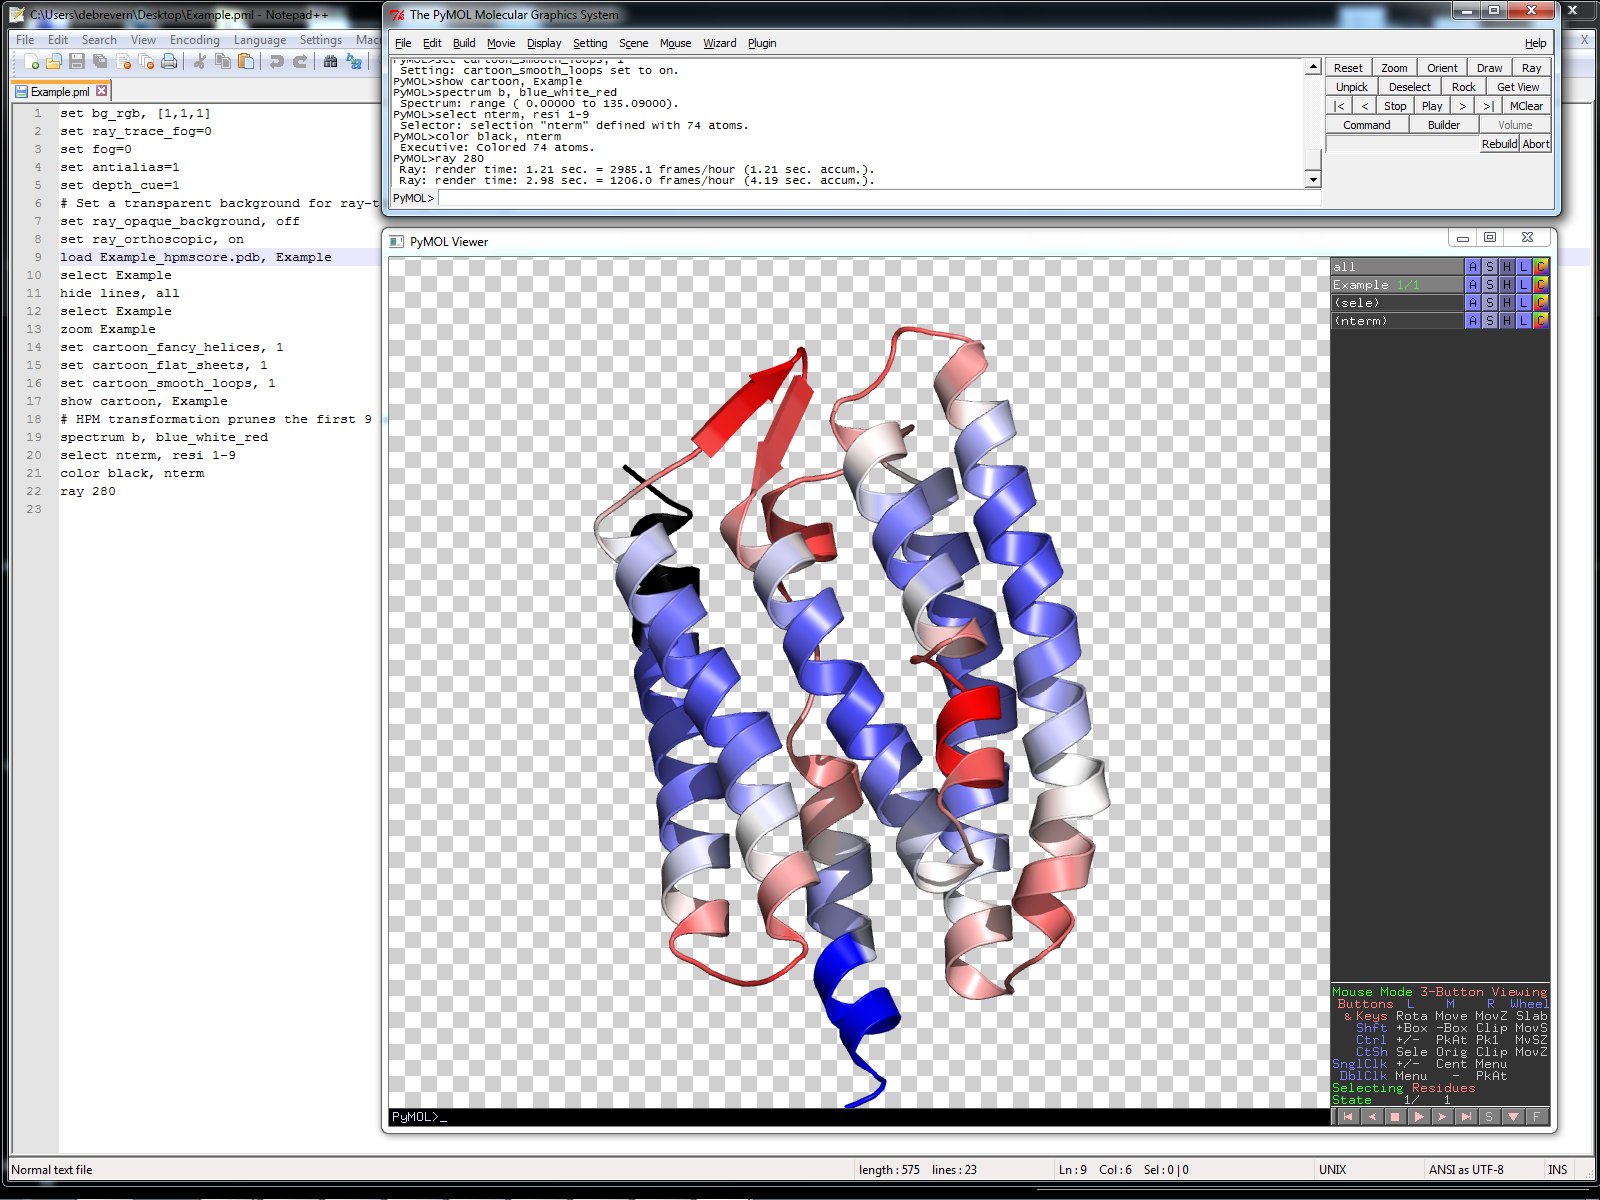 Pymol in action